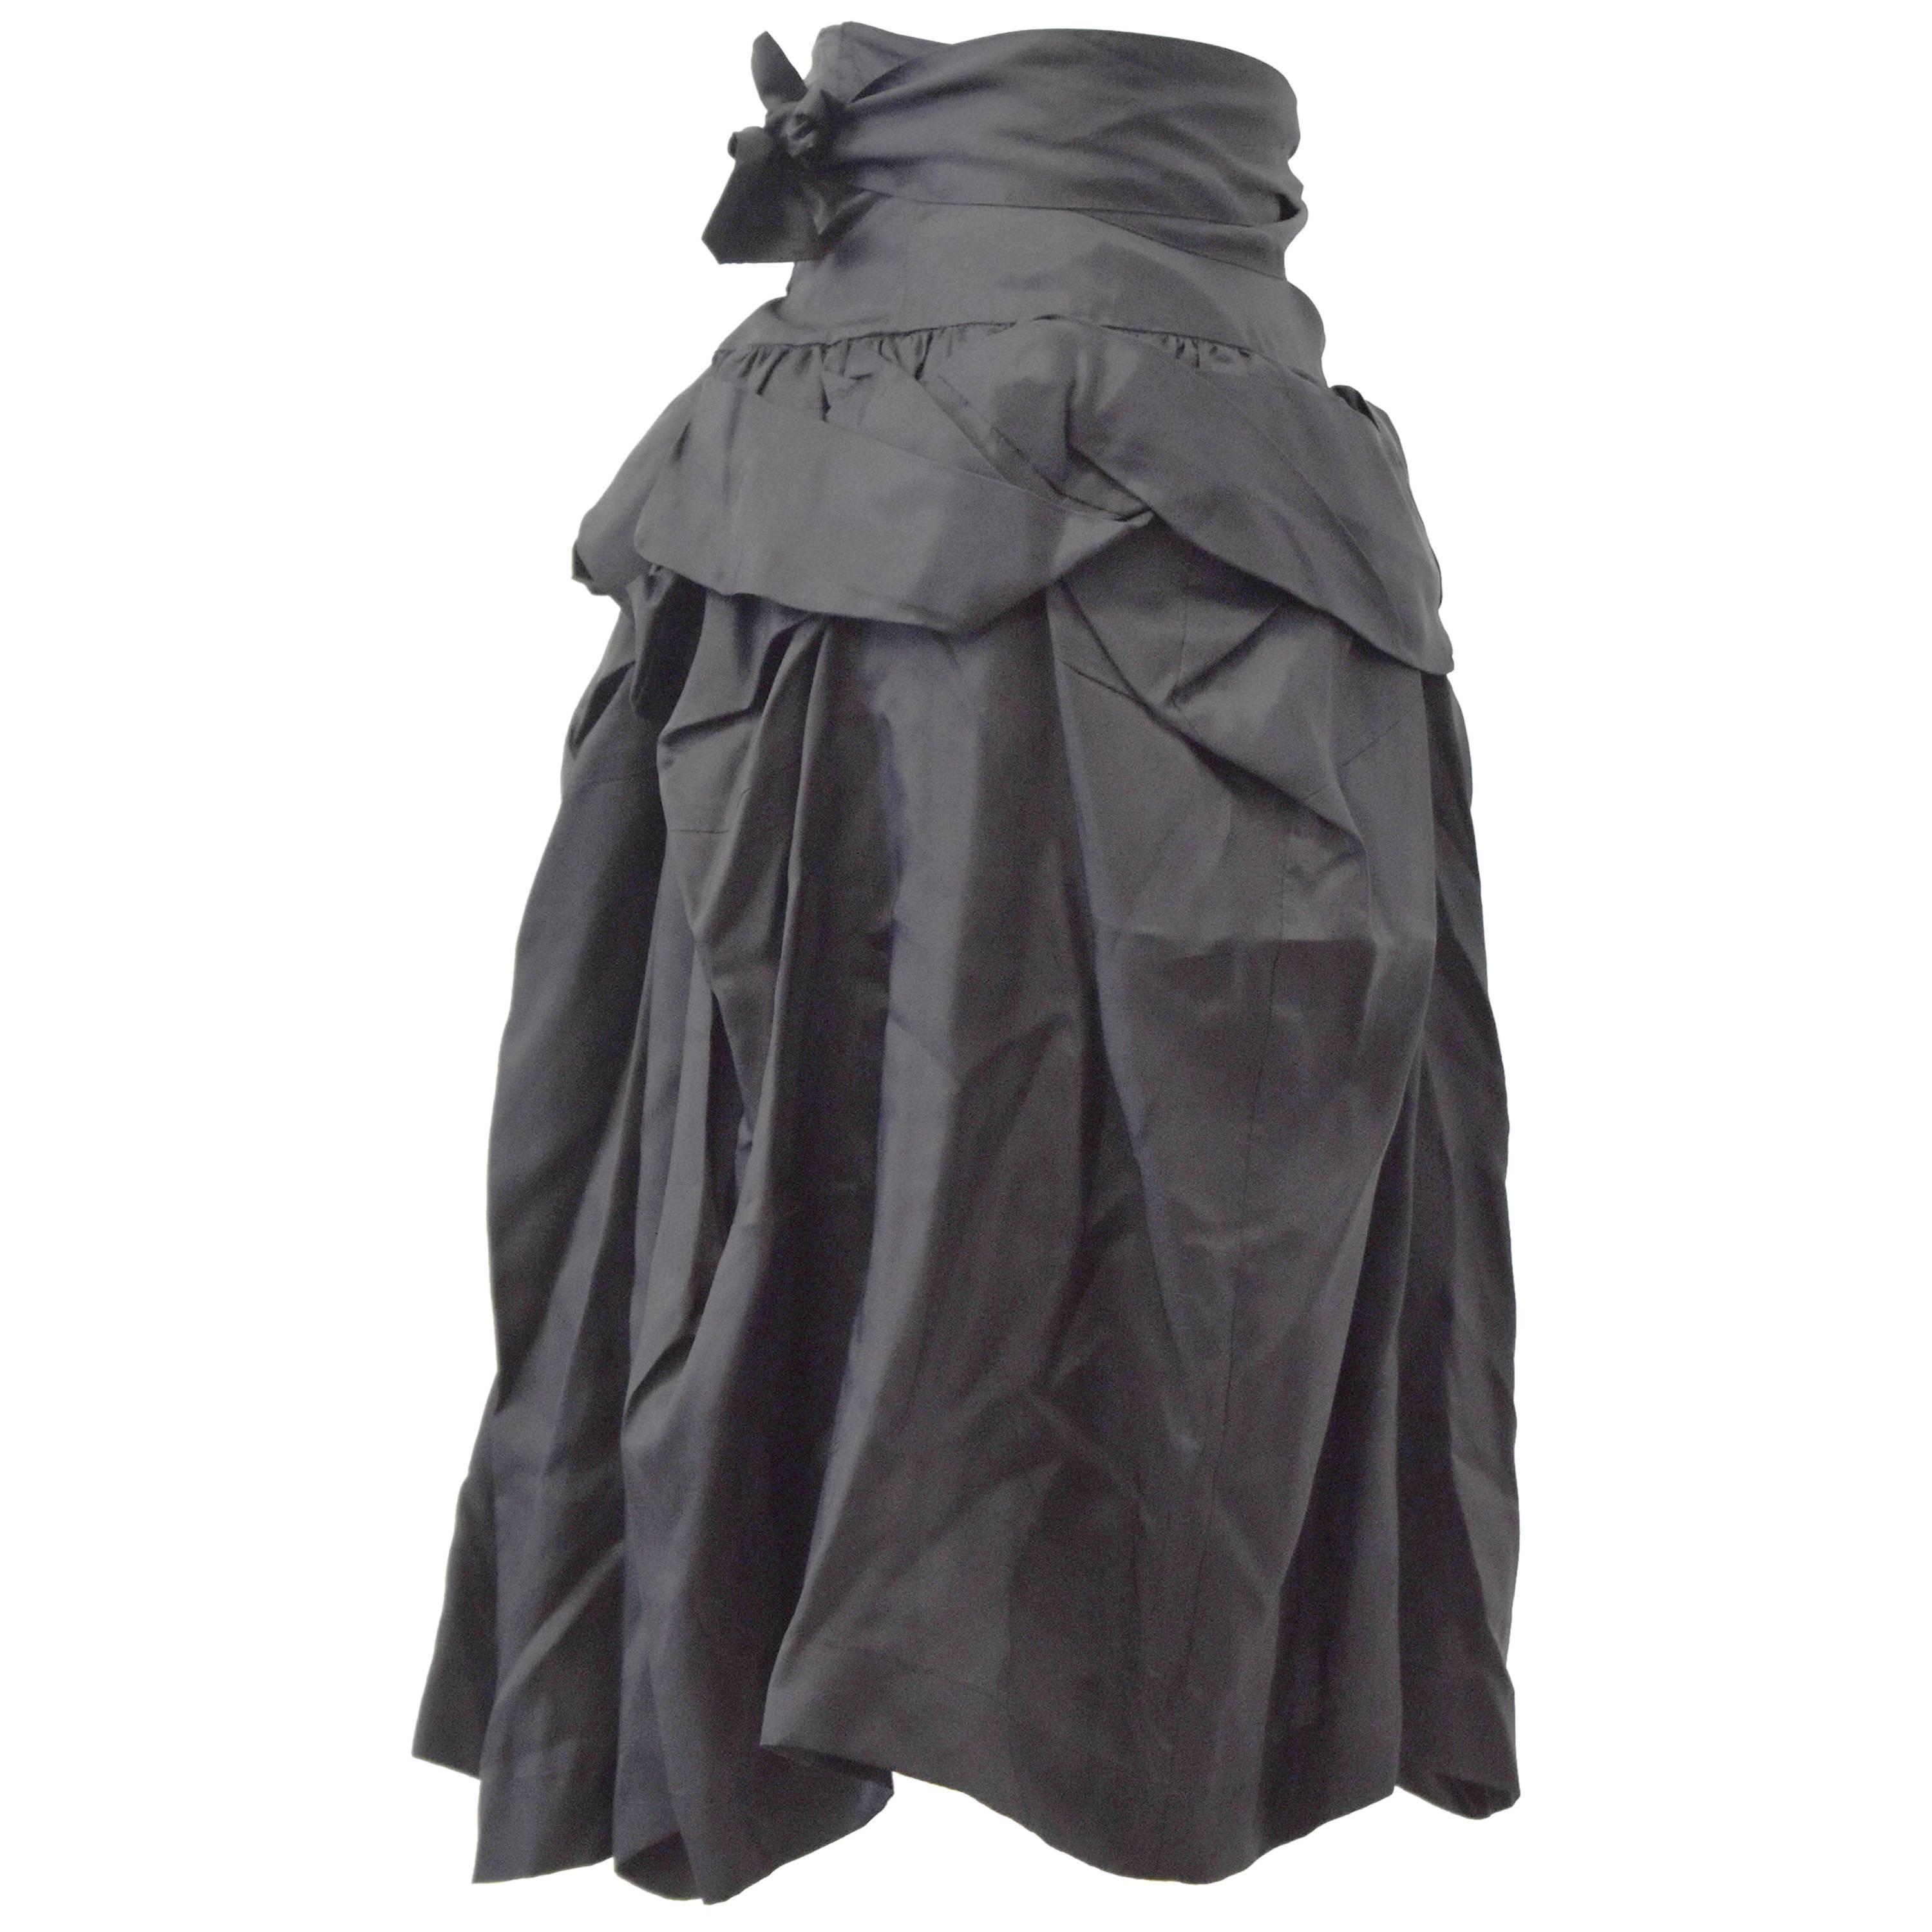 Comme des Garcons ‘Tao’ Black Ruffle skirt with tie-waist 2009